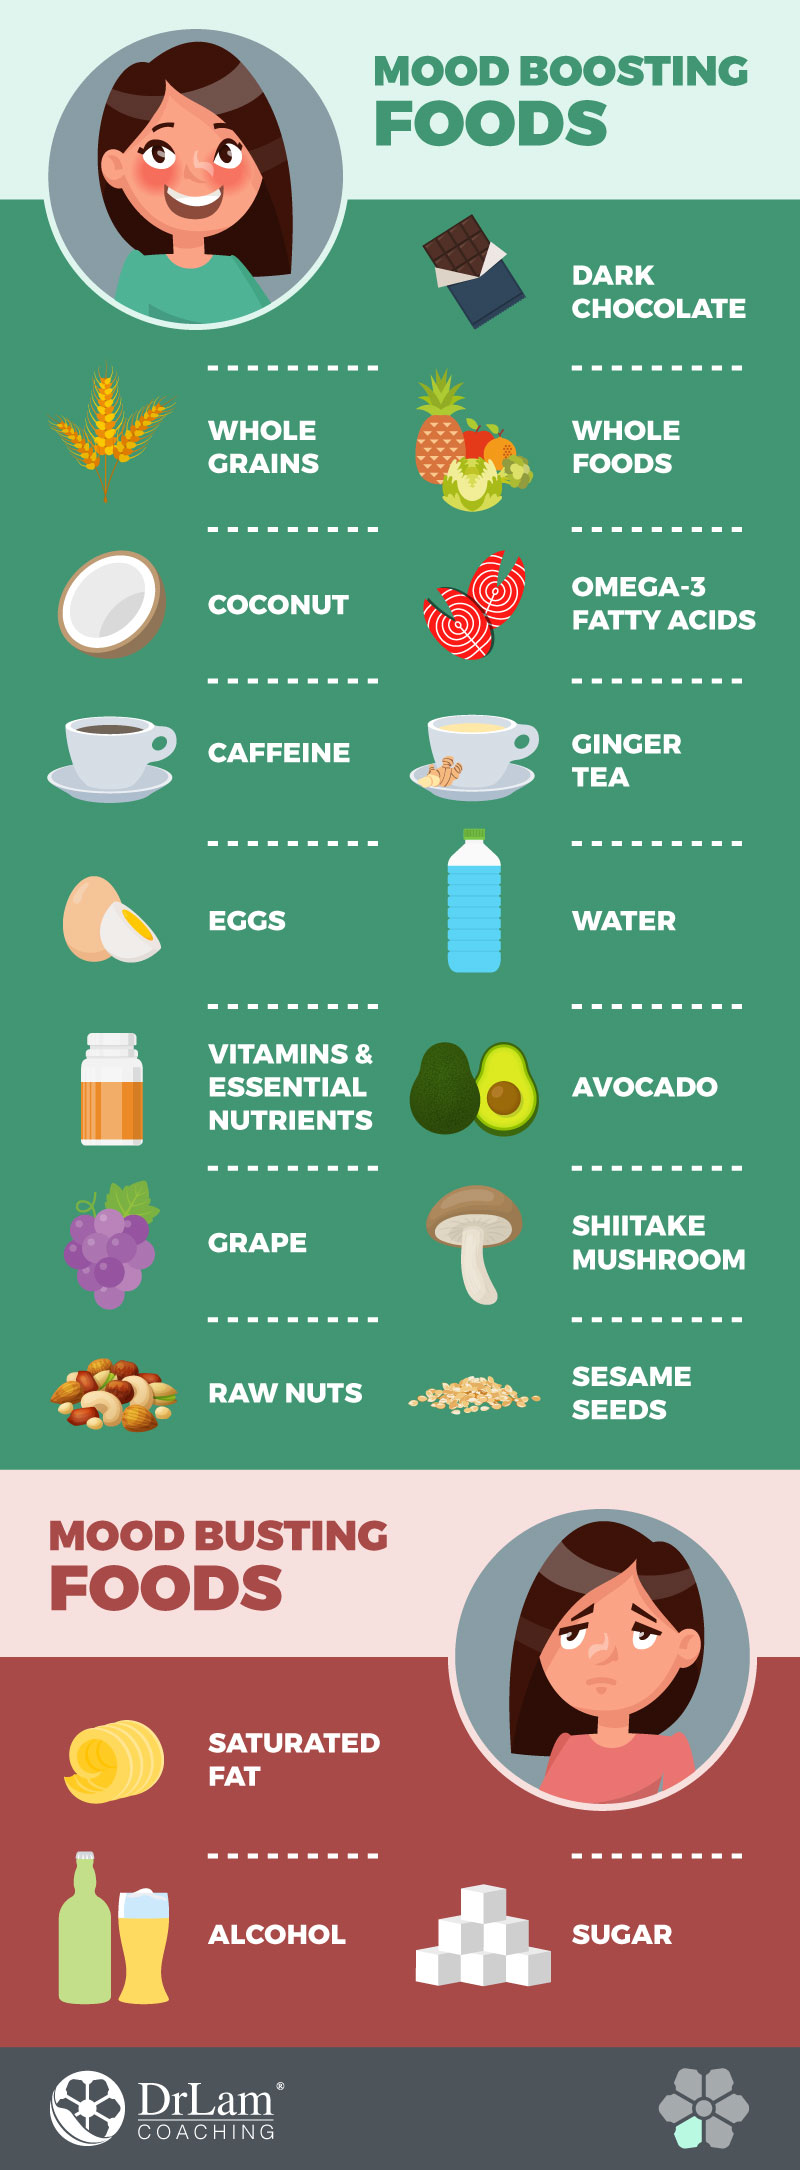 Check out this easy to understand infographic about mood boosting foods and mood busting foods